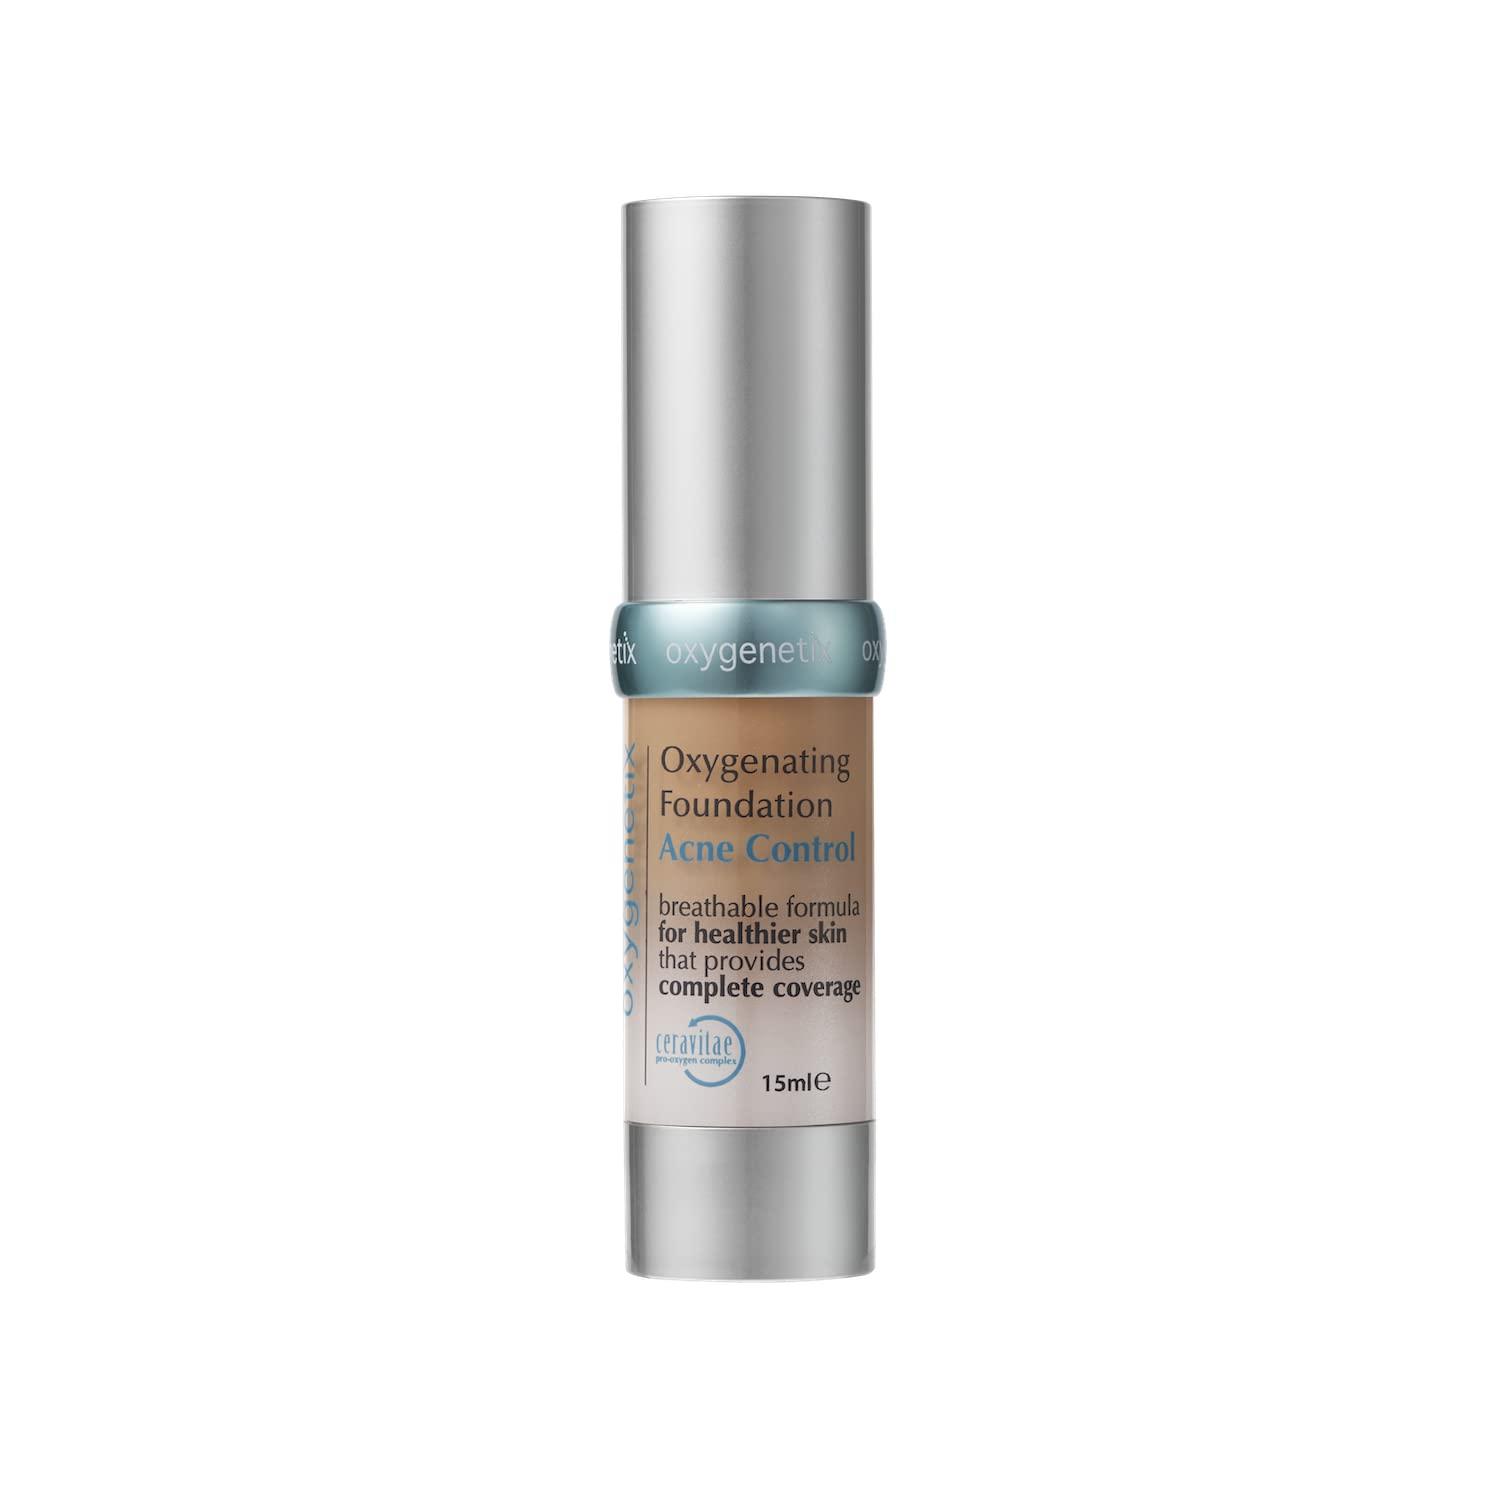 Oxygenetix Oxygenating Acne Control Foundation is a lightweight and breathable cream enriched with 2.0% Salicylic Acid.